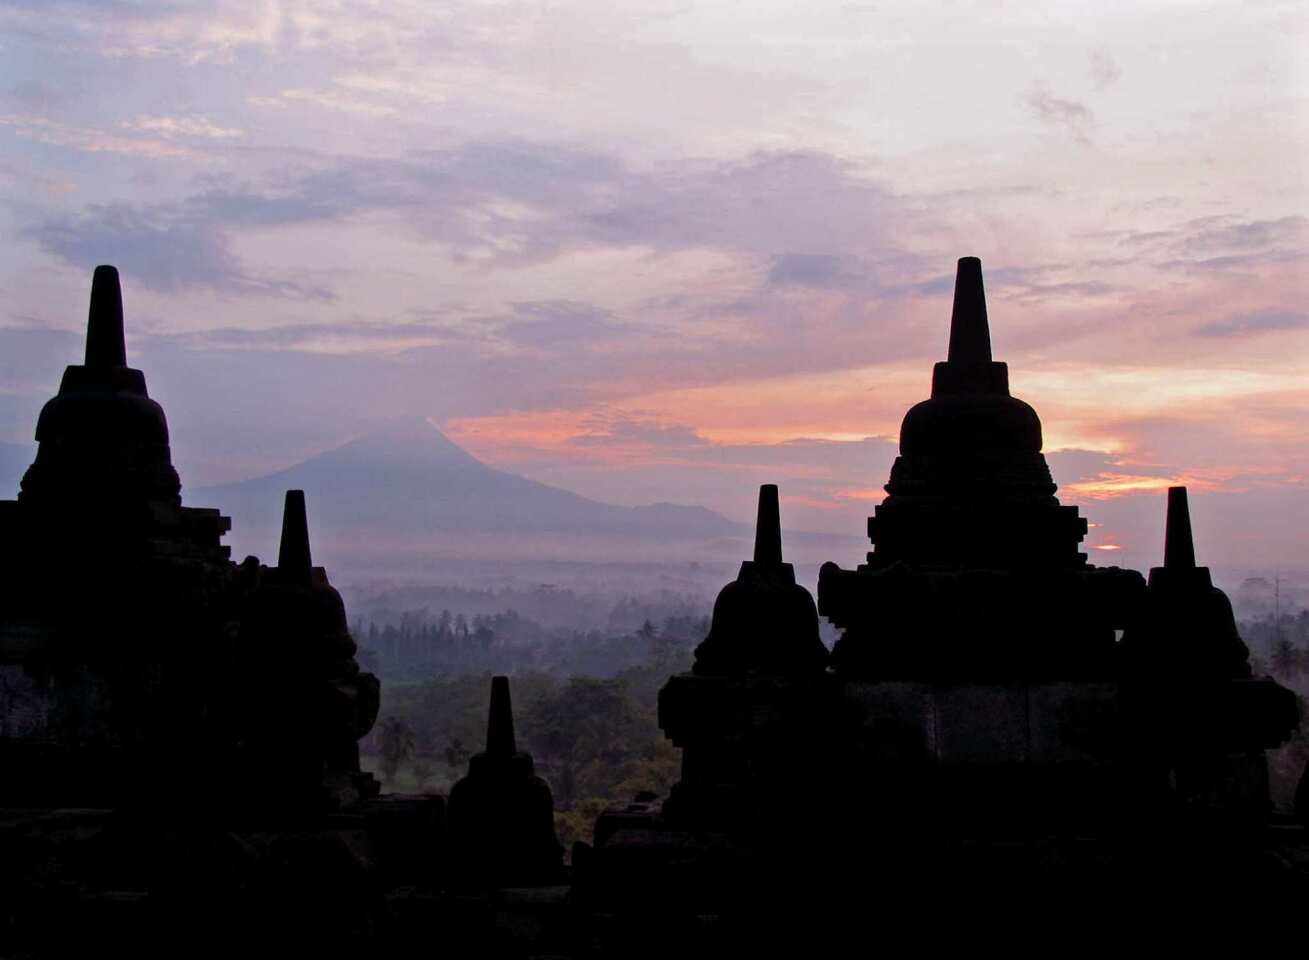 Mt. Merapi rises in the distance behind the stupas at Borobudur, a majestic, ancient temple devoted to Buddha in Indonesia. The temple is one of three great religious sites in Southeast Asia, but it's older and more esoteric than Bagan in Myanmar and Angkor Wat in Cambodia.